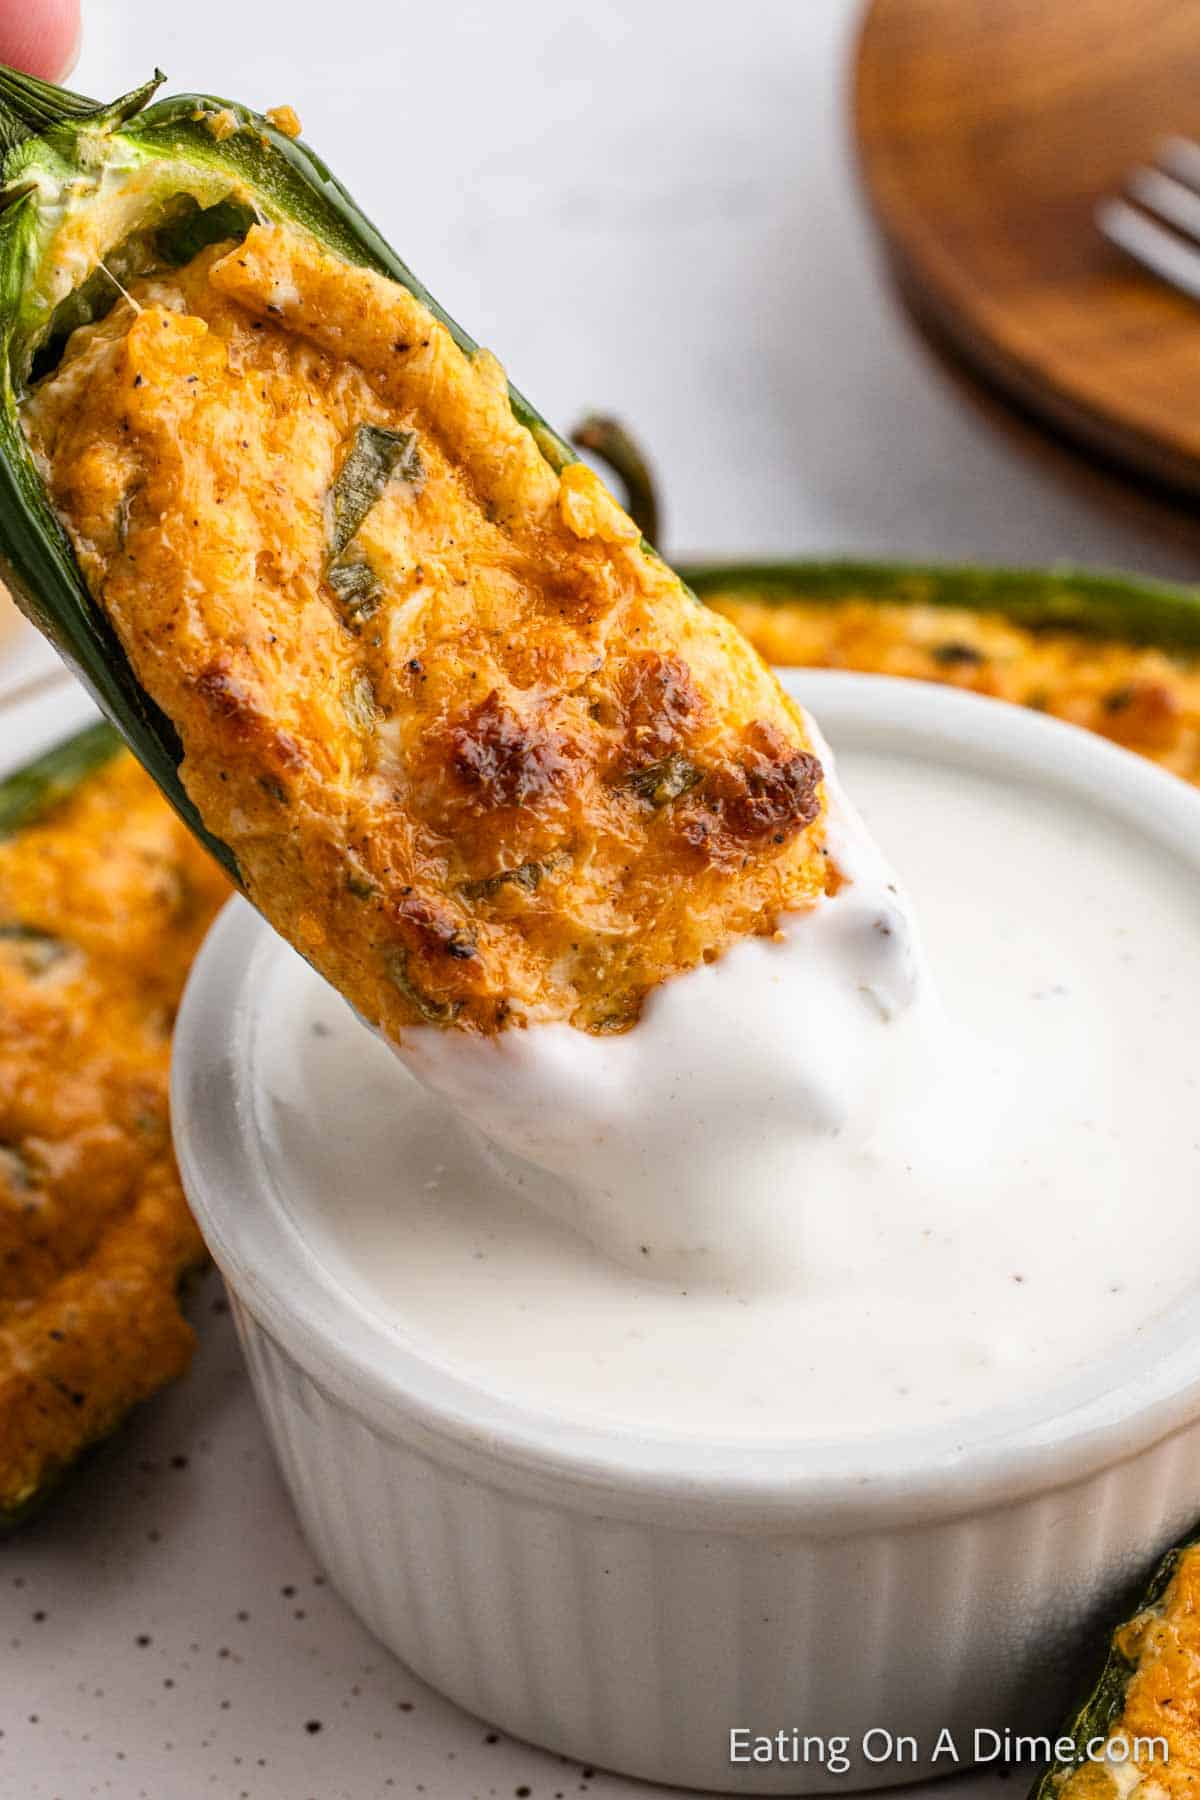 Stuffed Jalapeno dipped into the ranch dressing bowl